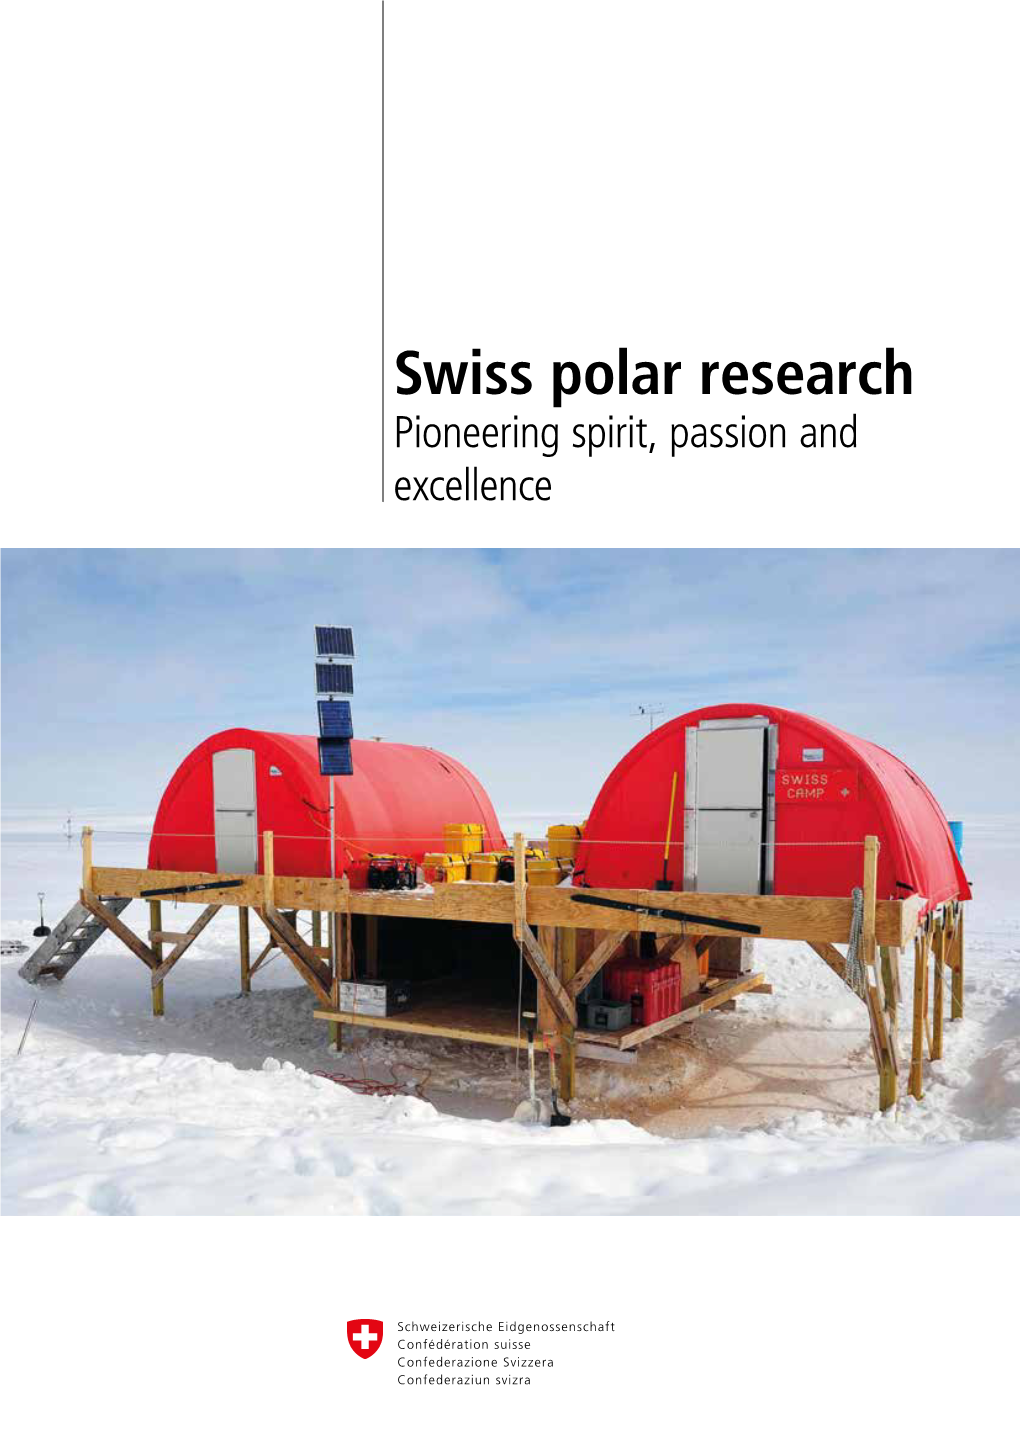 Swiss Polar Research Pioneering Spirit, Passion and Excellence ARCTIC 3 “I HAVE NO SPECIAL TALENT